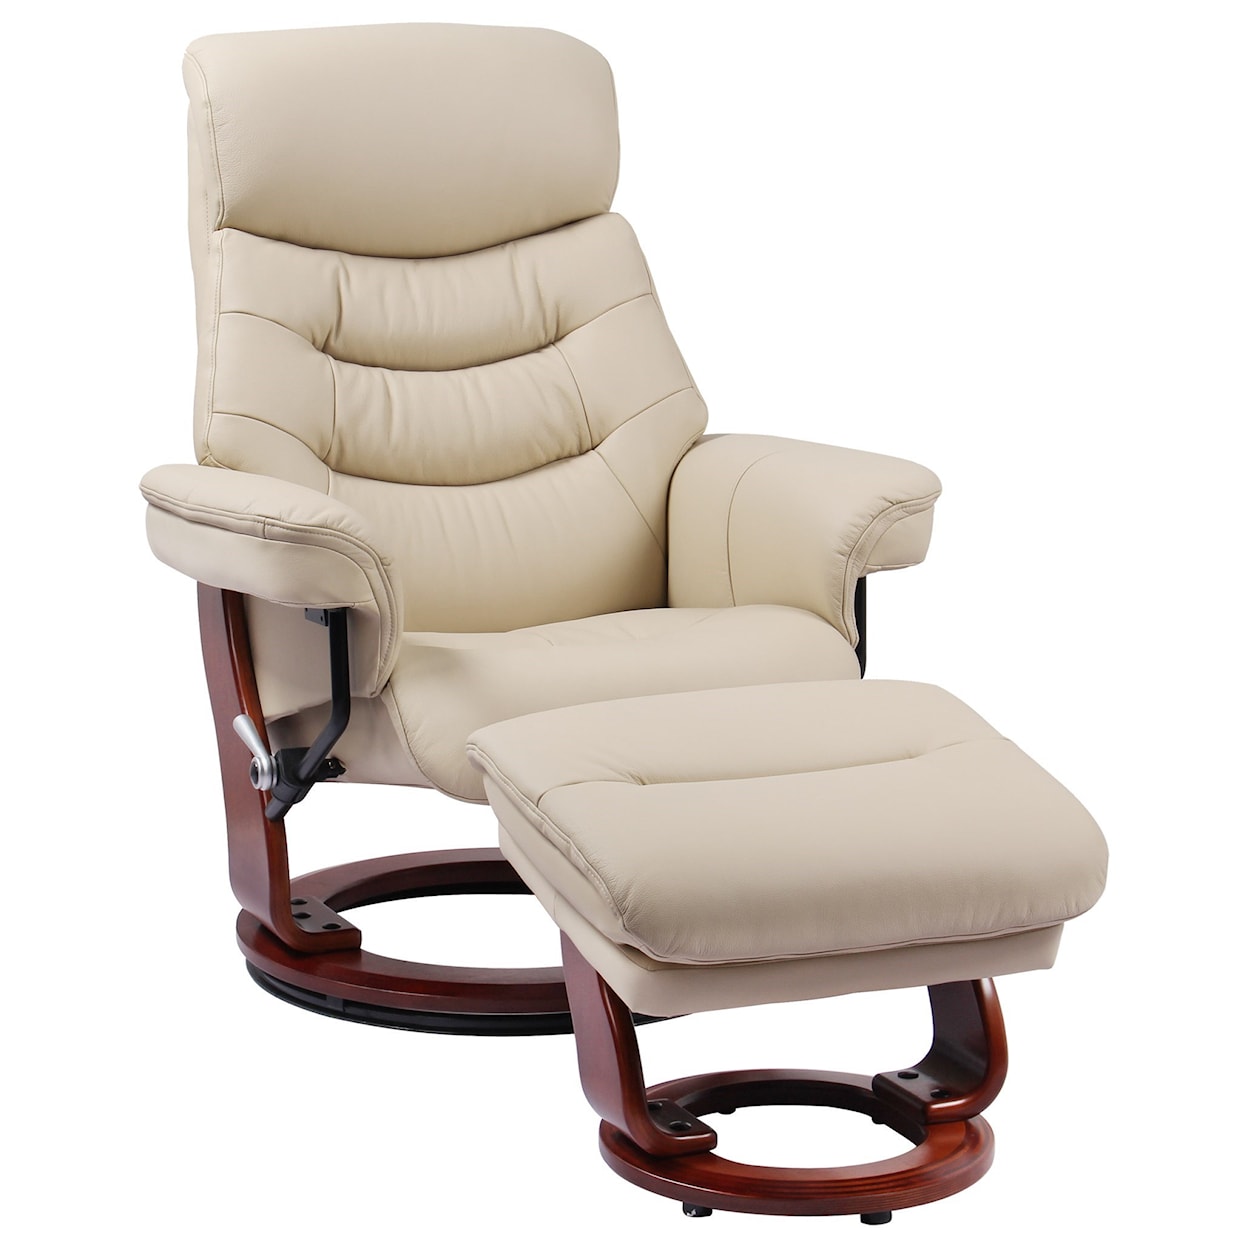 Benchmaster Happy Reclining Chair and Ottoman